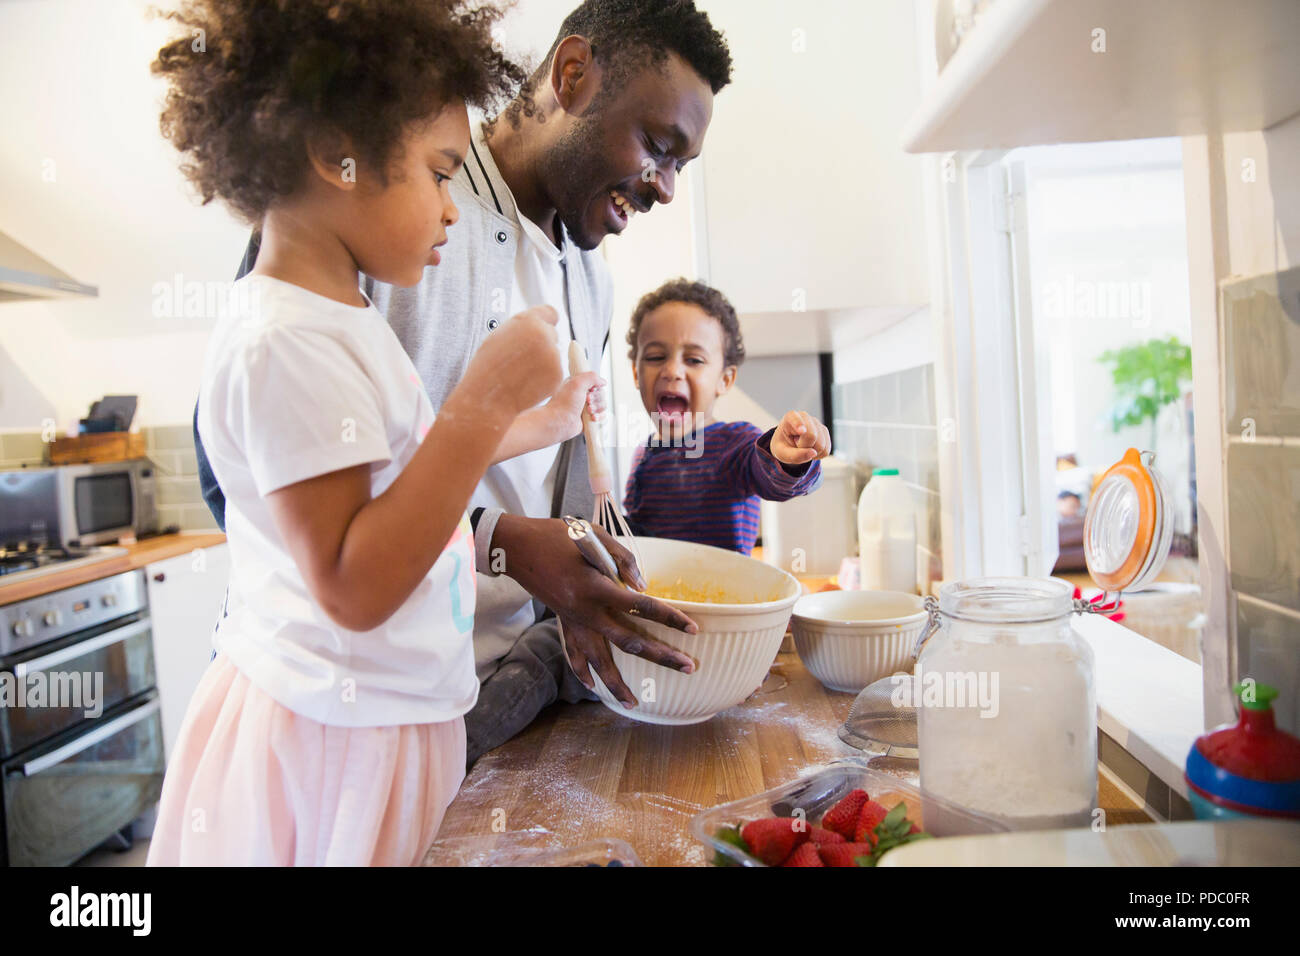 Father and toddler children baking in kitchen Stock Photo